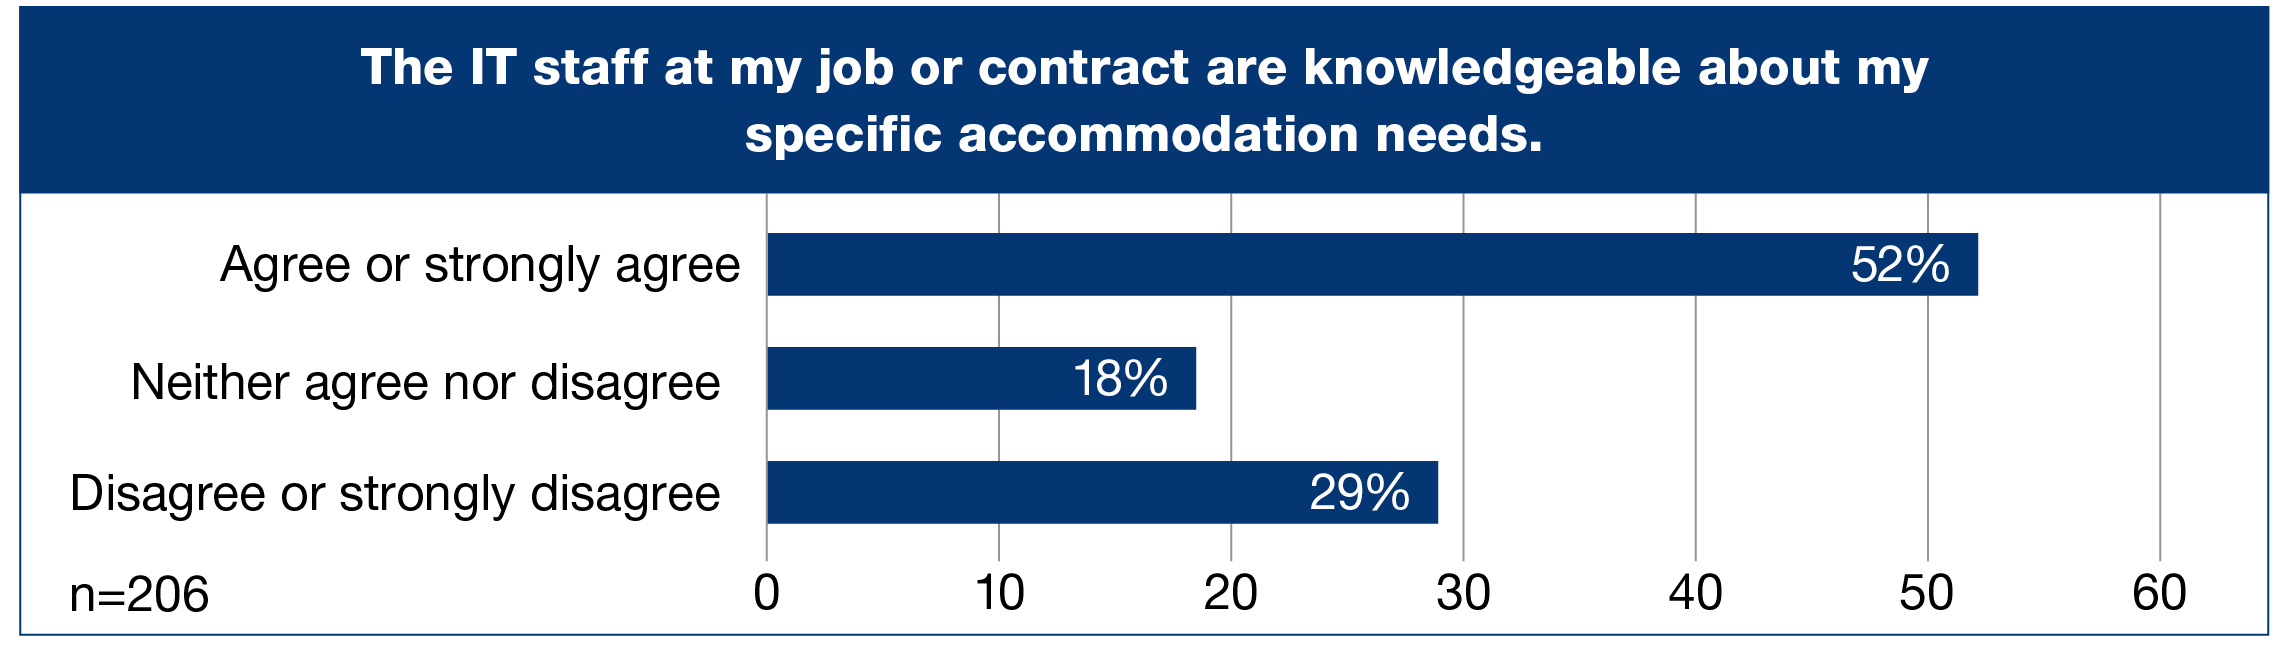 The IT staff at my job or contract are knowledgeable about my specific accommodation needs, (Percentage of n=206), horizontal bar graph with three bars, Agree or strongly agree, 52%; Neither agree nor disagree, 18%; Disagree or strongly disagree, 29%.